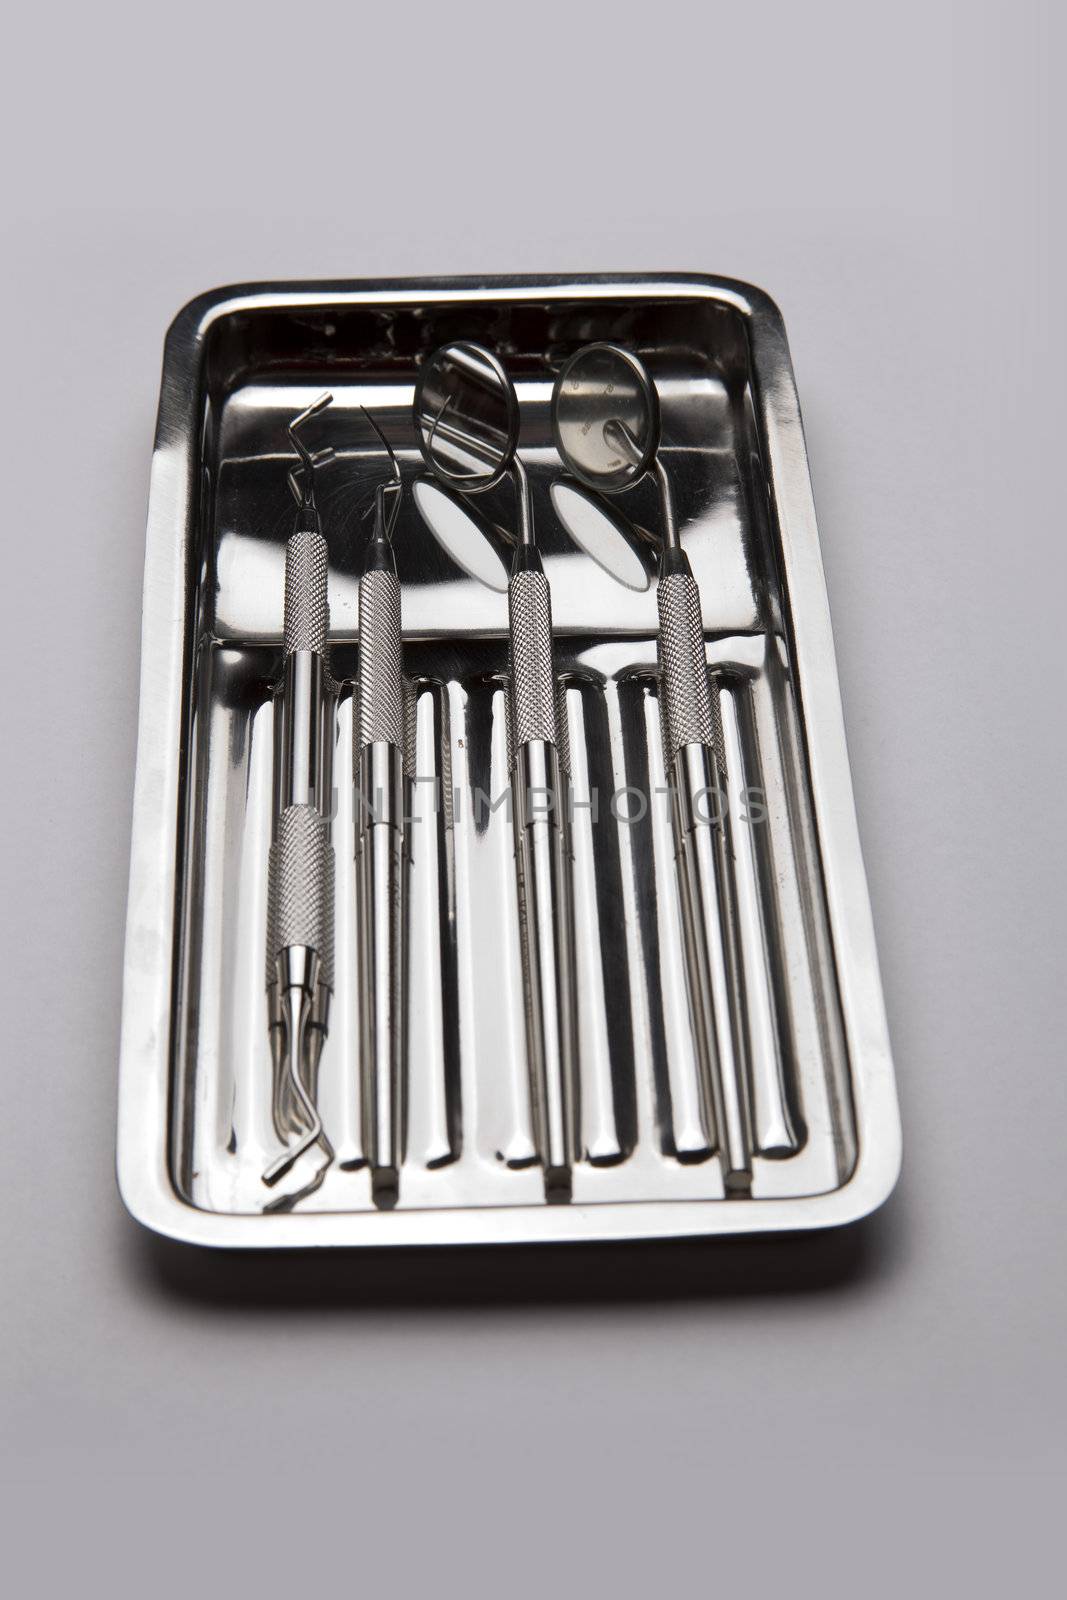 Dental Instruments - plate by adamr